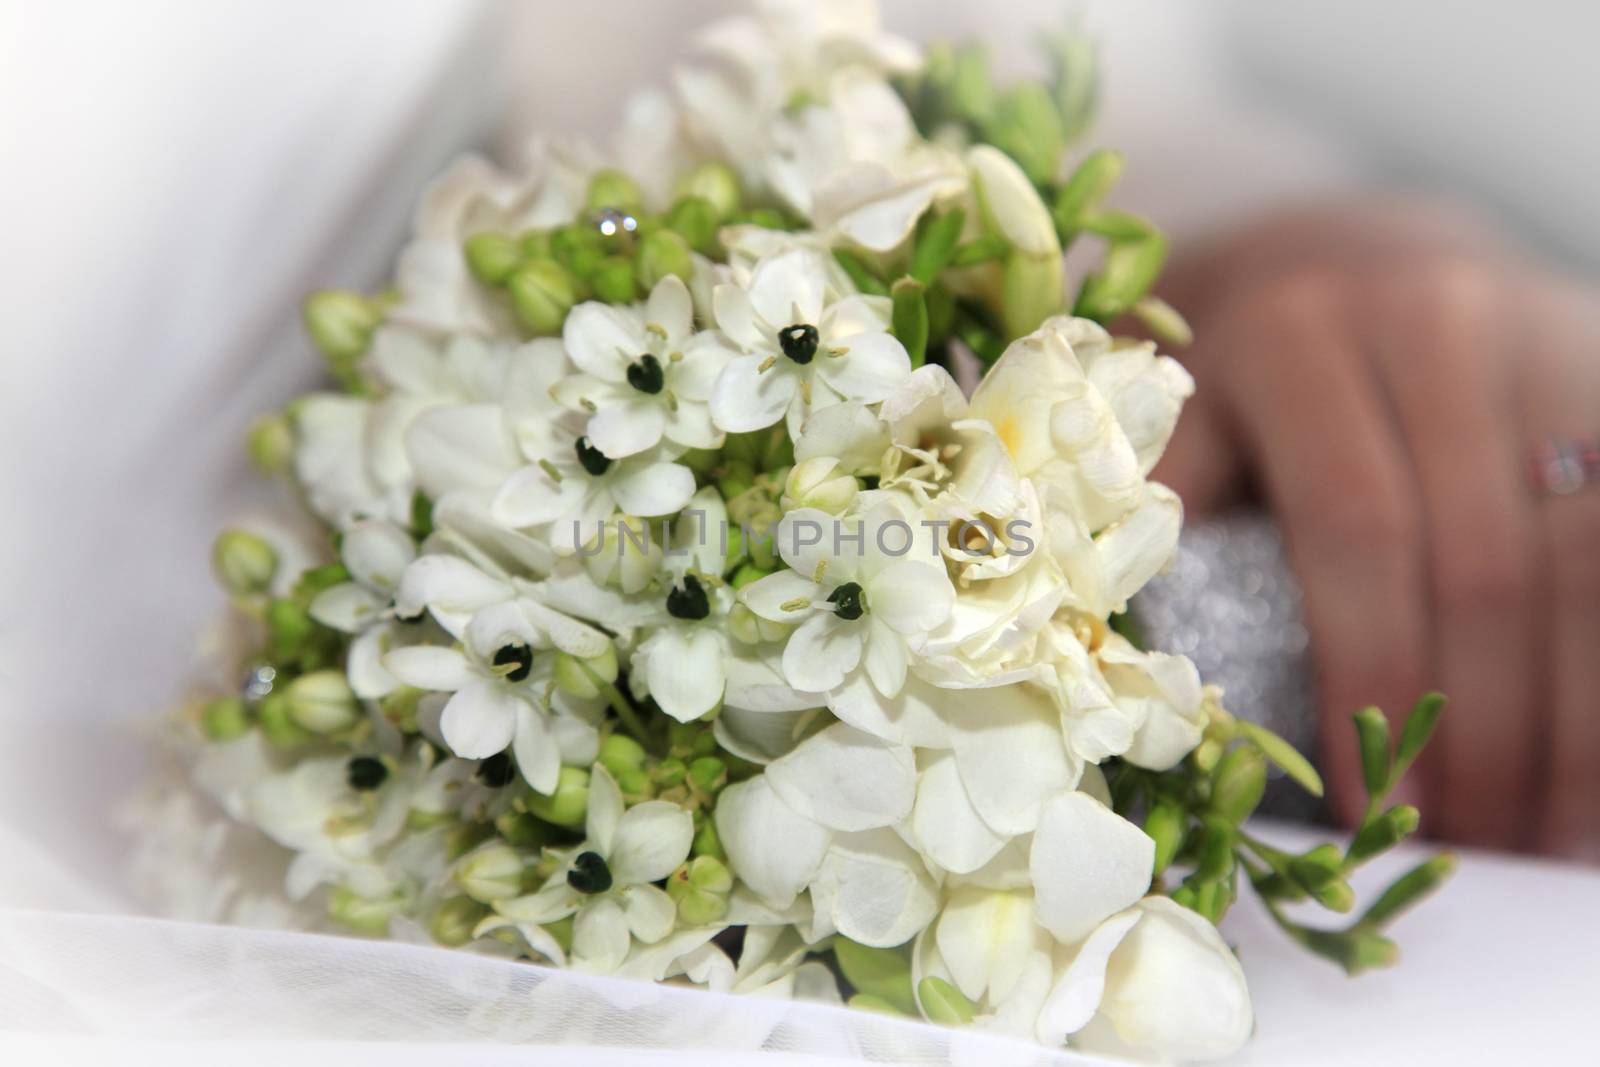 Hand of the bride with wedding bouquet